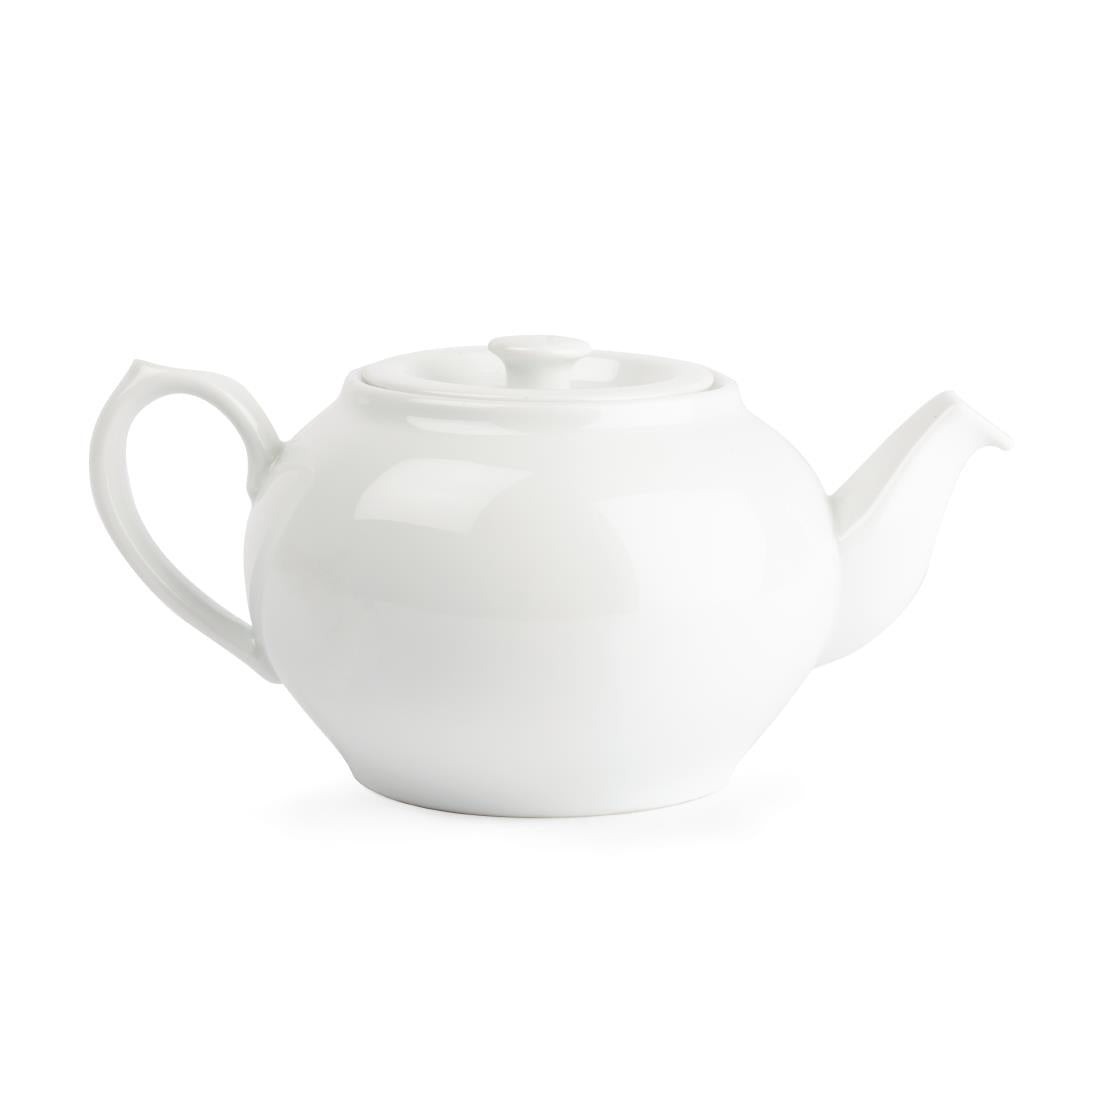 CG124 Royal Porcelain Oriental Teapots with Lids 600ml (Pack of 2)